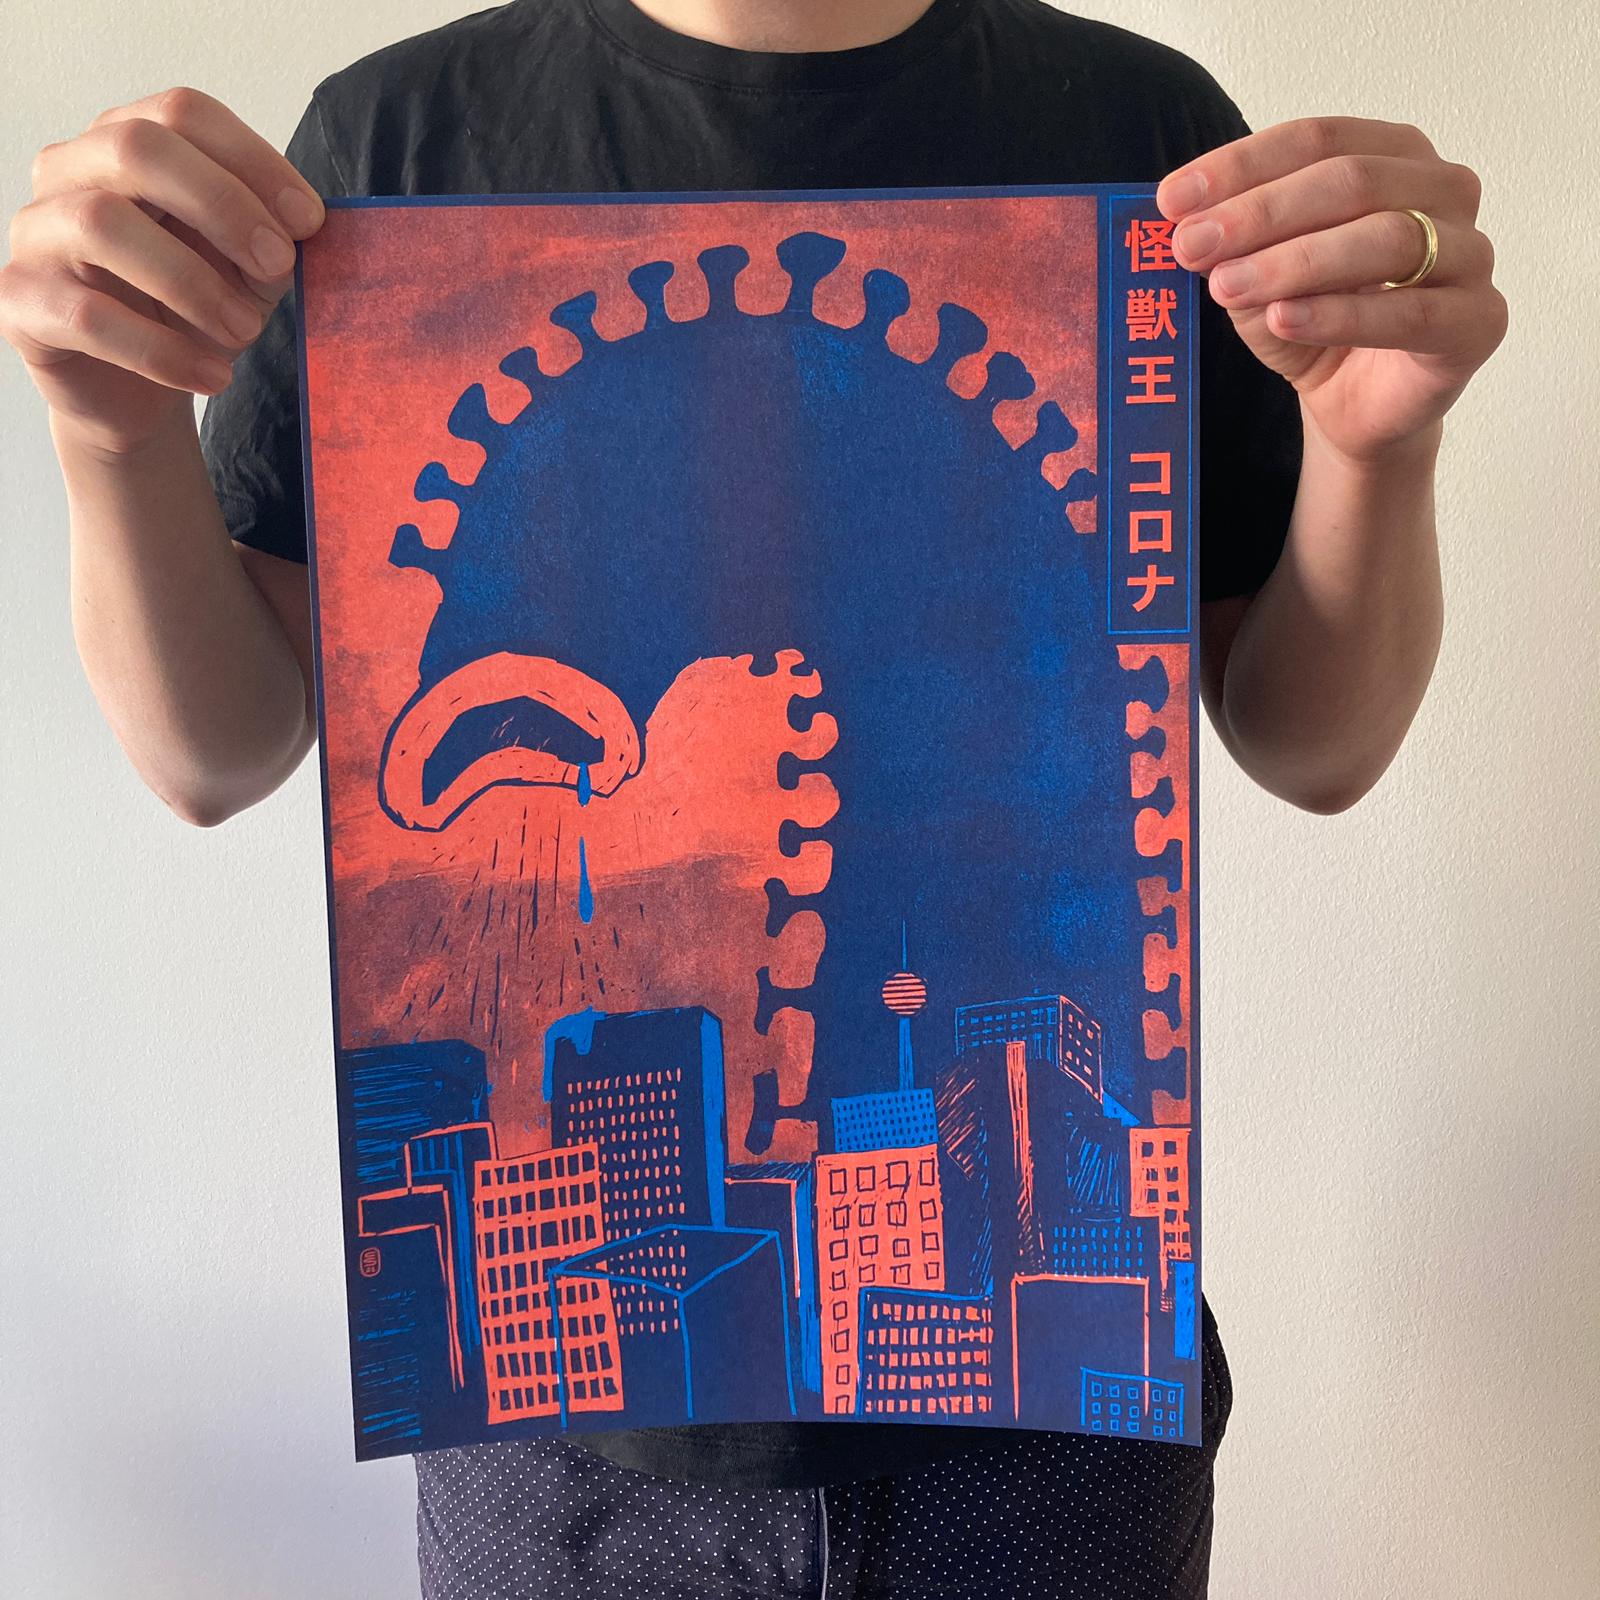 CORONA - KING OF MONSTERS riso poster